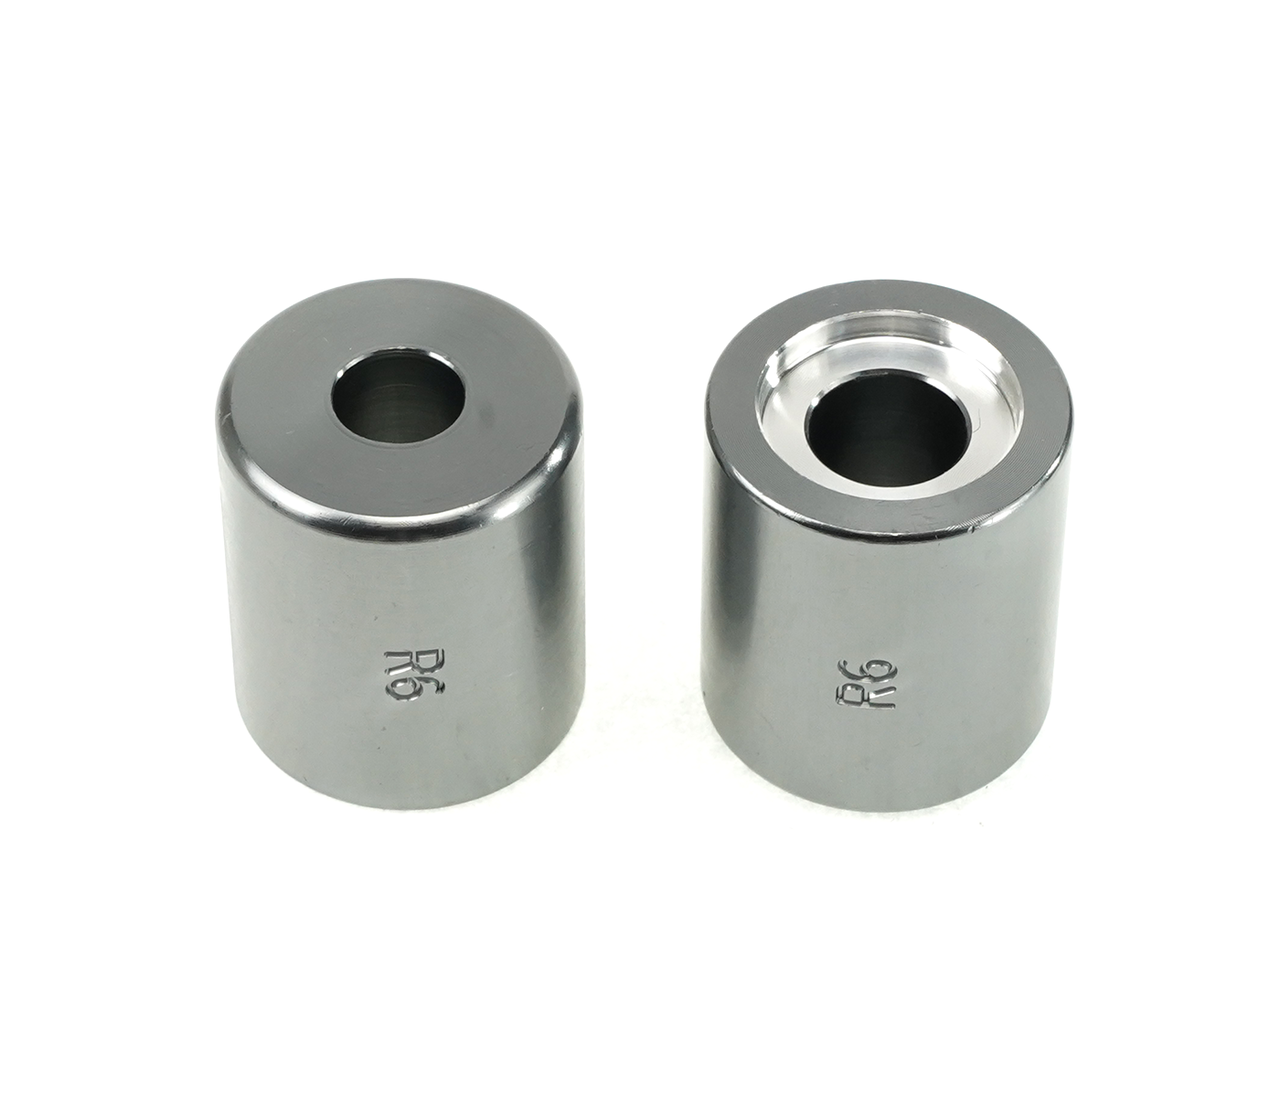 Enduro HT R6 Outer - Outer Bearing Guide for Bearing Press (BRT-005 or BRT-050) - single guide only